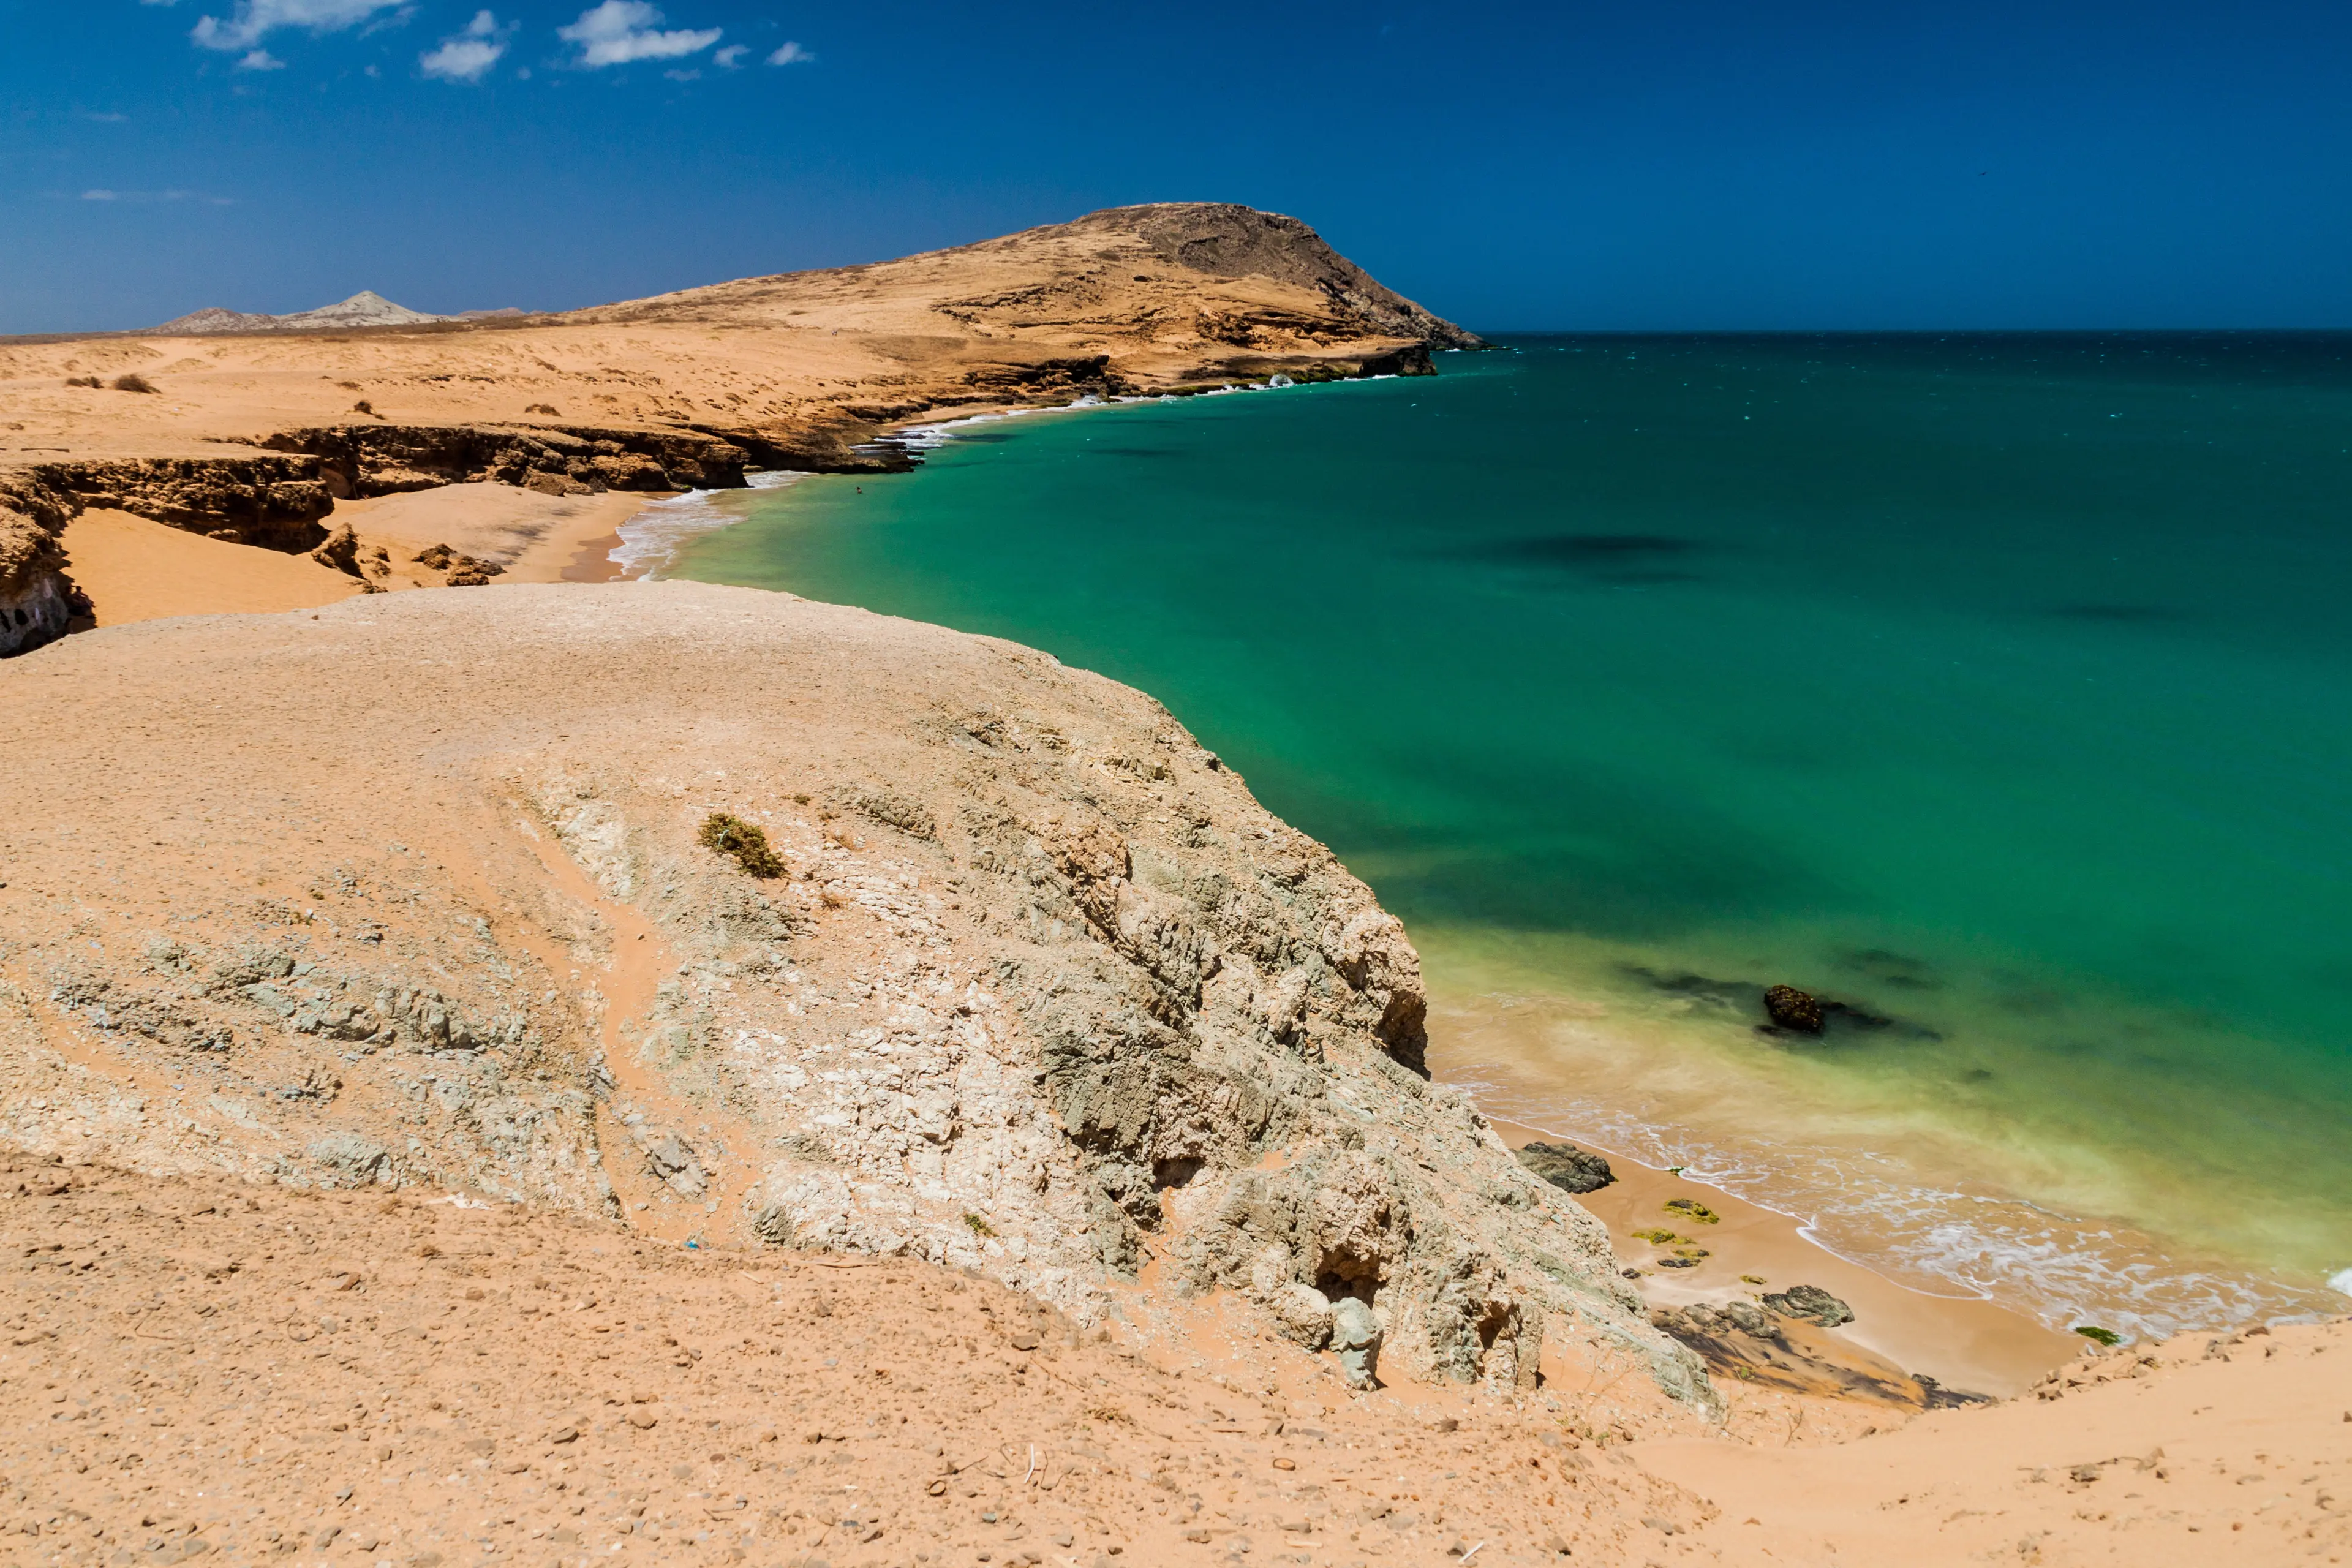 3-Day Local Family Adventure: Relaxation & Sightseeing in La Guajira, Colombia